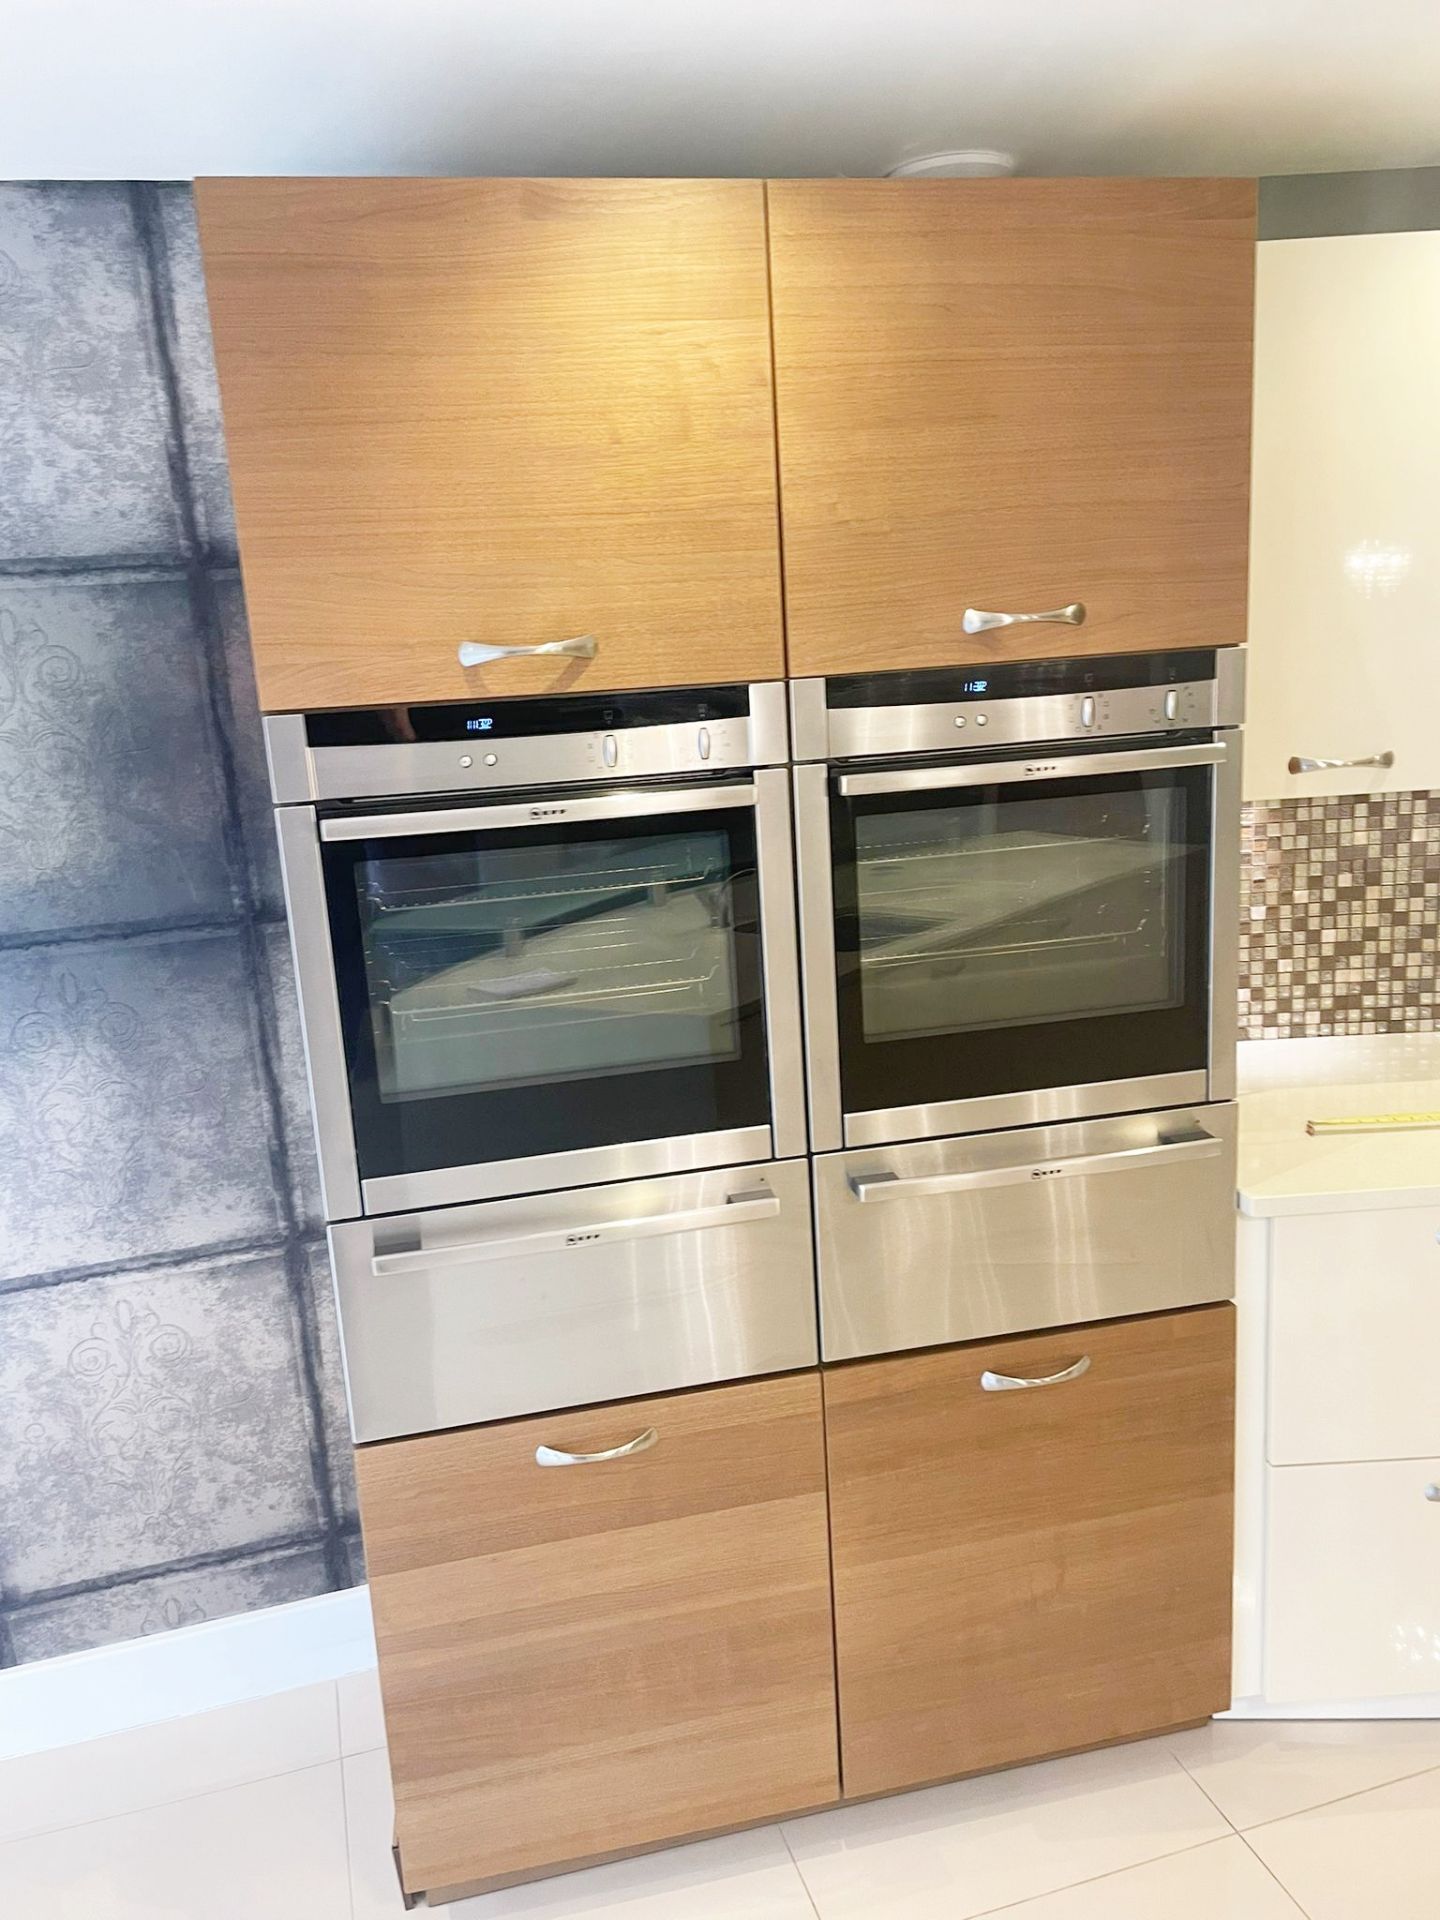 1 x Contemporary ALNO Fitted Kitchen With Branded  Appliances Created By Award Winning Kitchen - Image 51 of 89